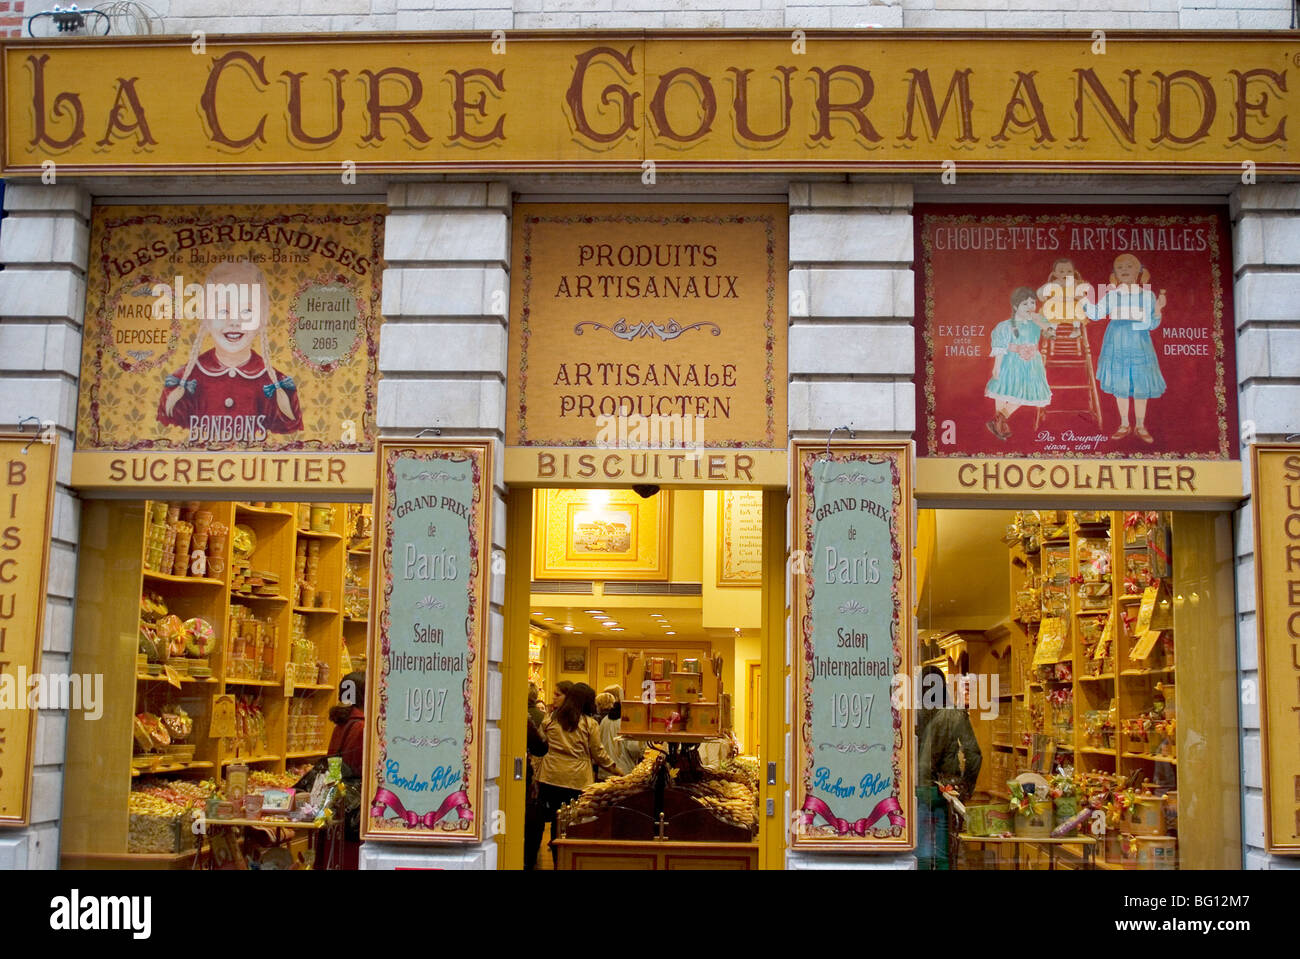 La Cure Gourmand sweet, biscuit and chocolate shop, Brussels, Belgium, Europe Stock Photo